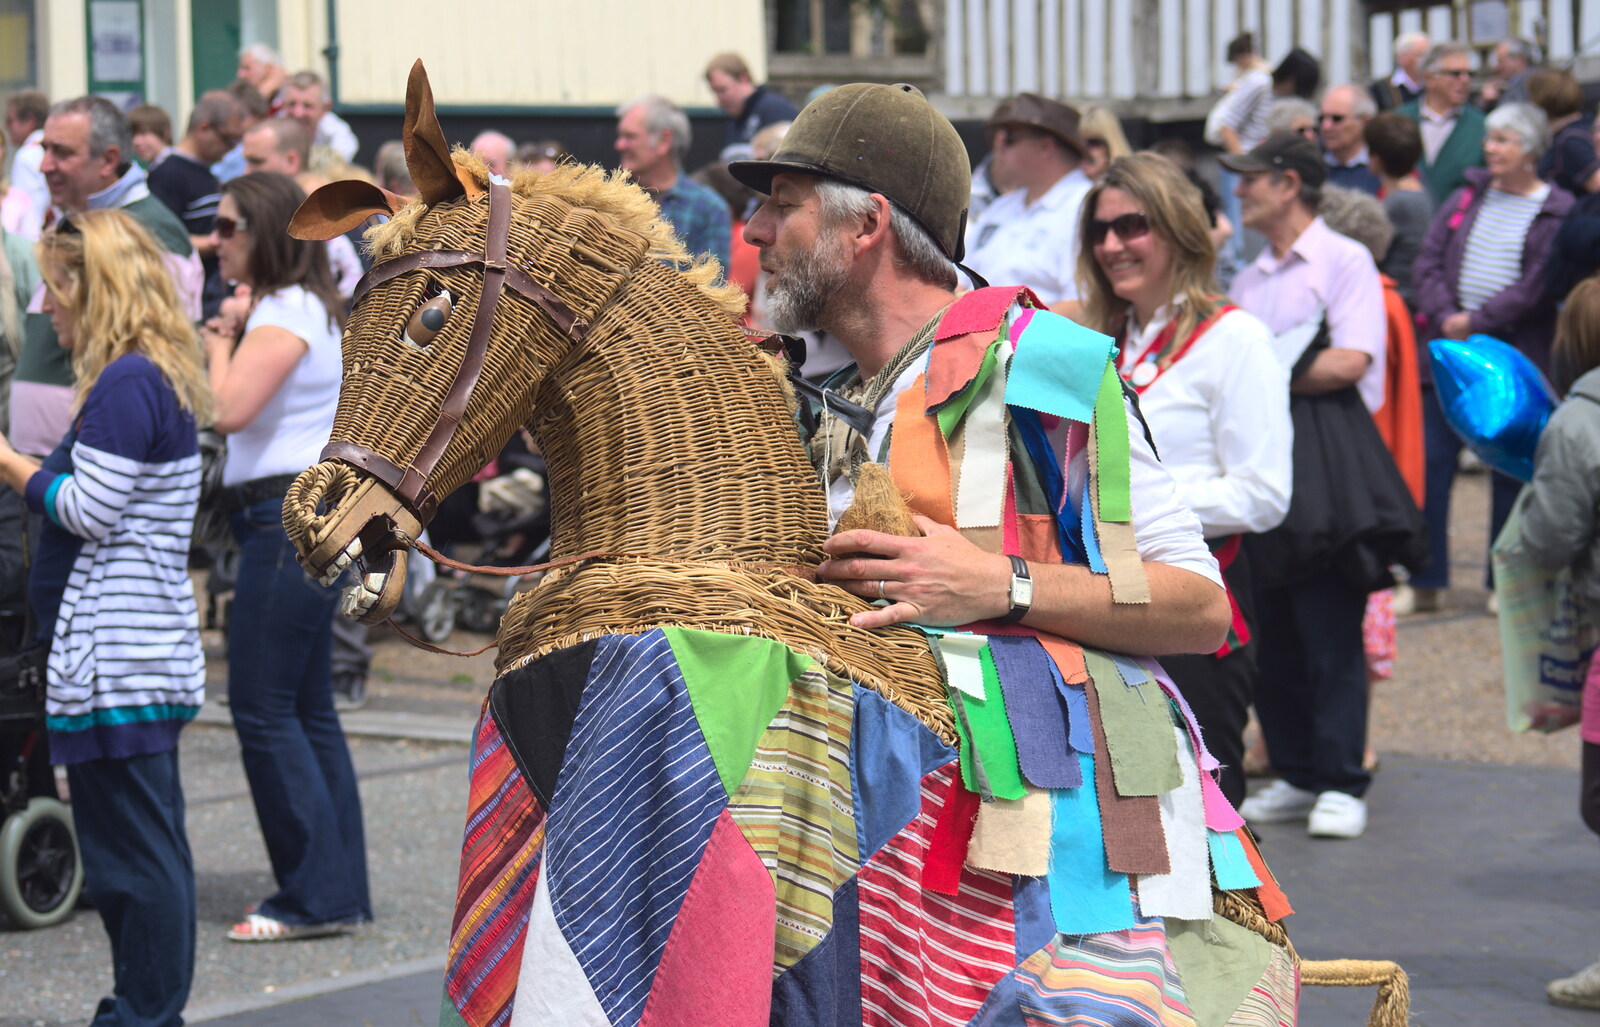 A dude with a wicker horse from Morris Dancing and a Carnival Procession, Diss, Norfolk - 17th June 2012